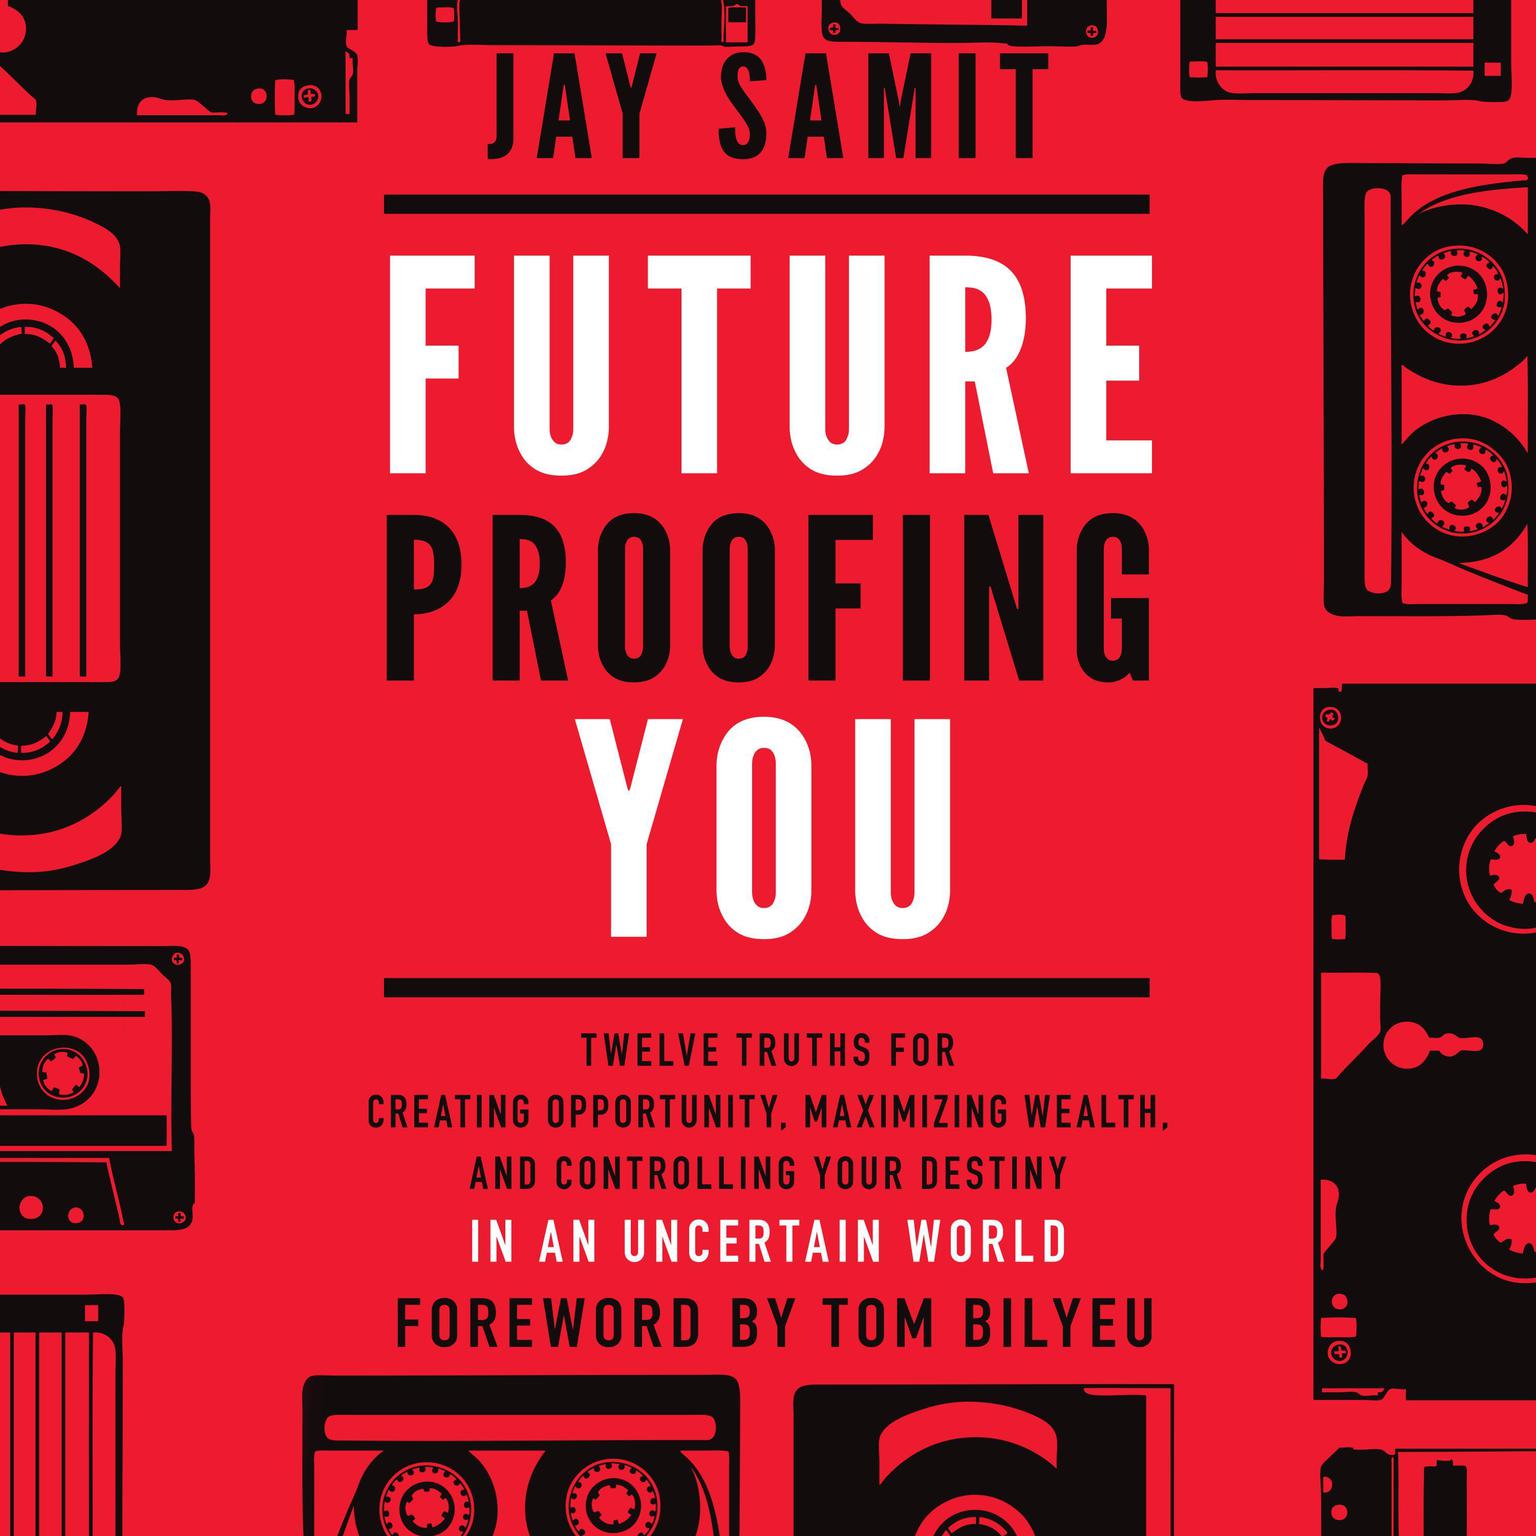 Future Proofing You: Twelve Truths for Creating Opportunity, Maximizing Wealth, and Controlling your Destiny in an Uncertain World Audiobook, by Jay Samit